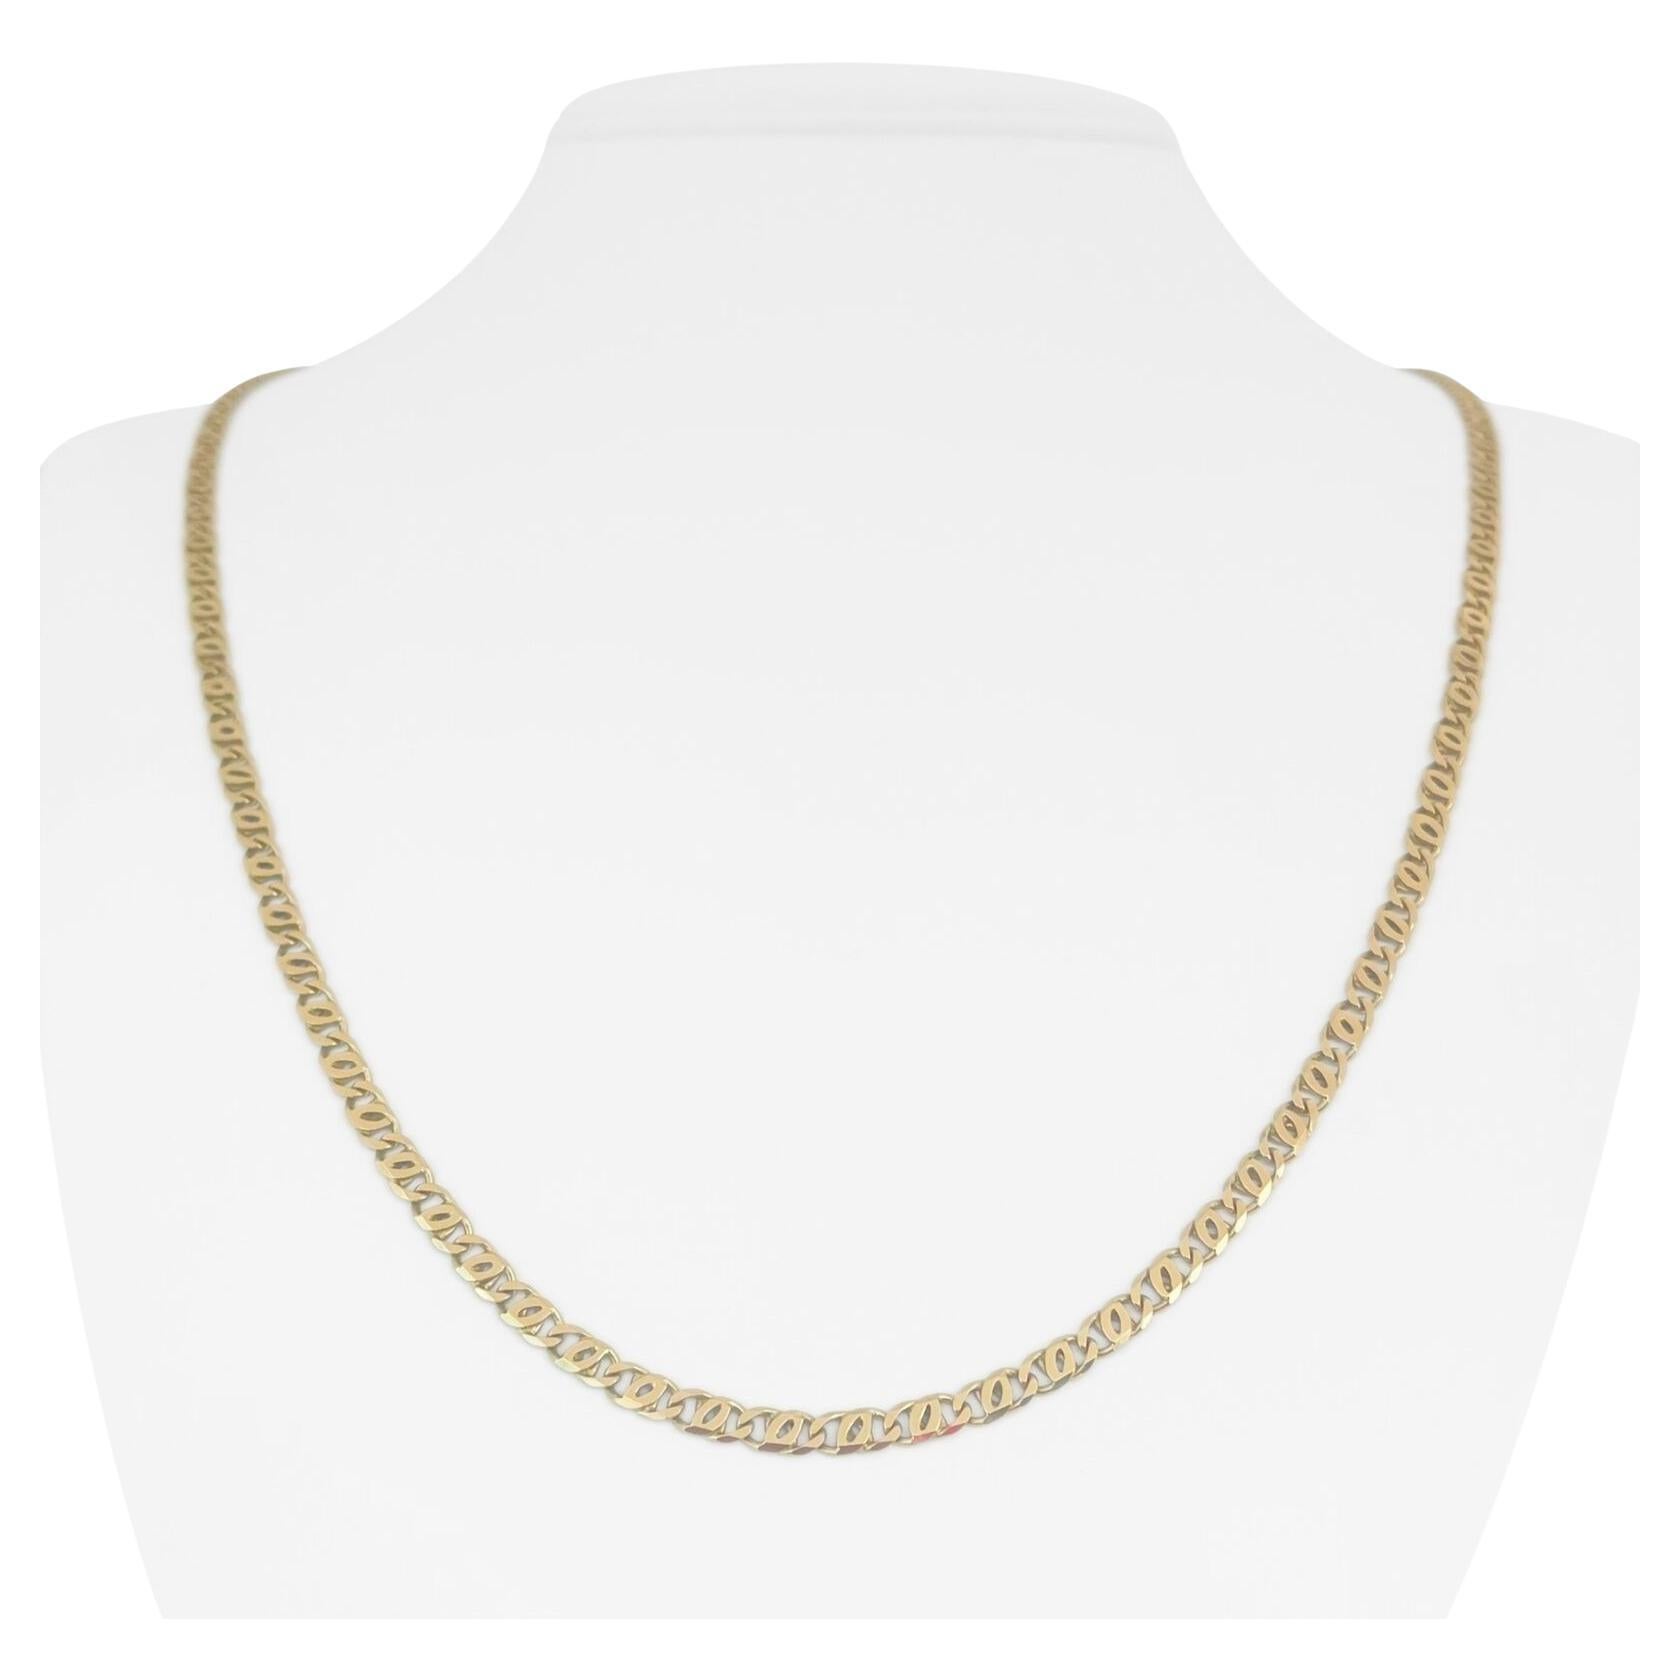 18k Karat Yellow Gold Solid Double Curb Link Chain Necklace Italy 